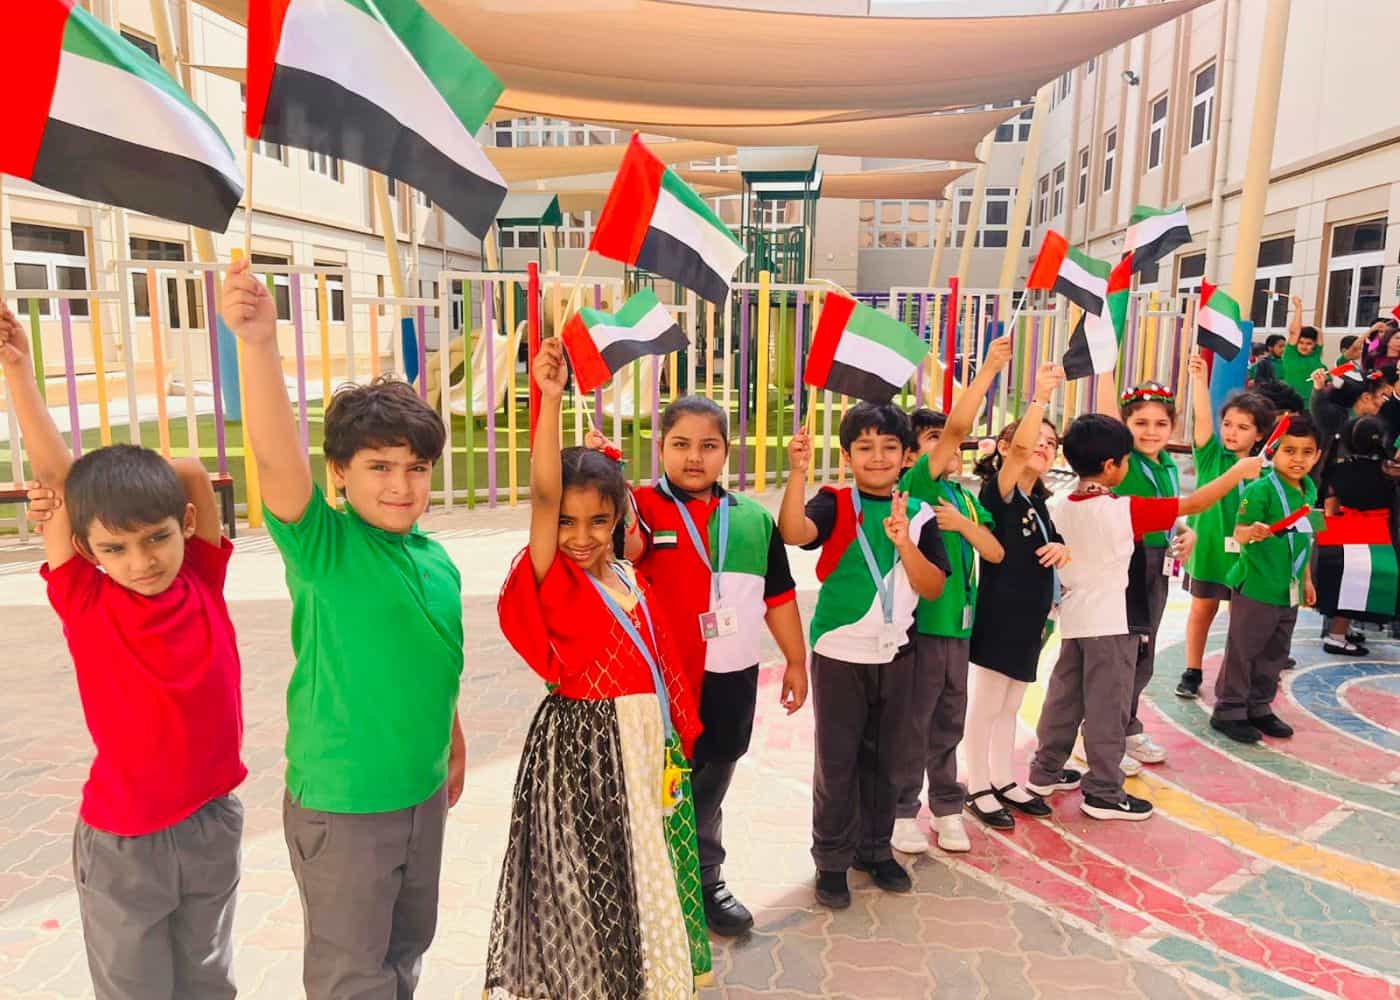 Students of Abu Dhabi International School at the Flag Day event